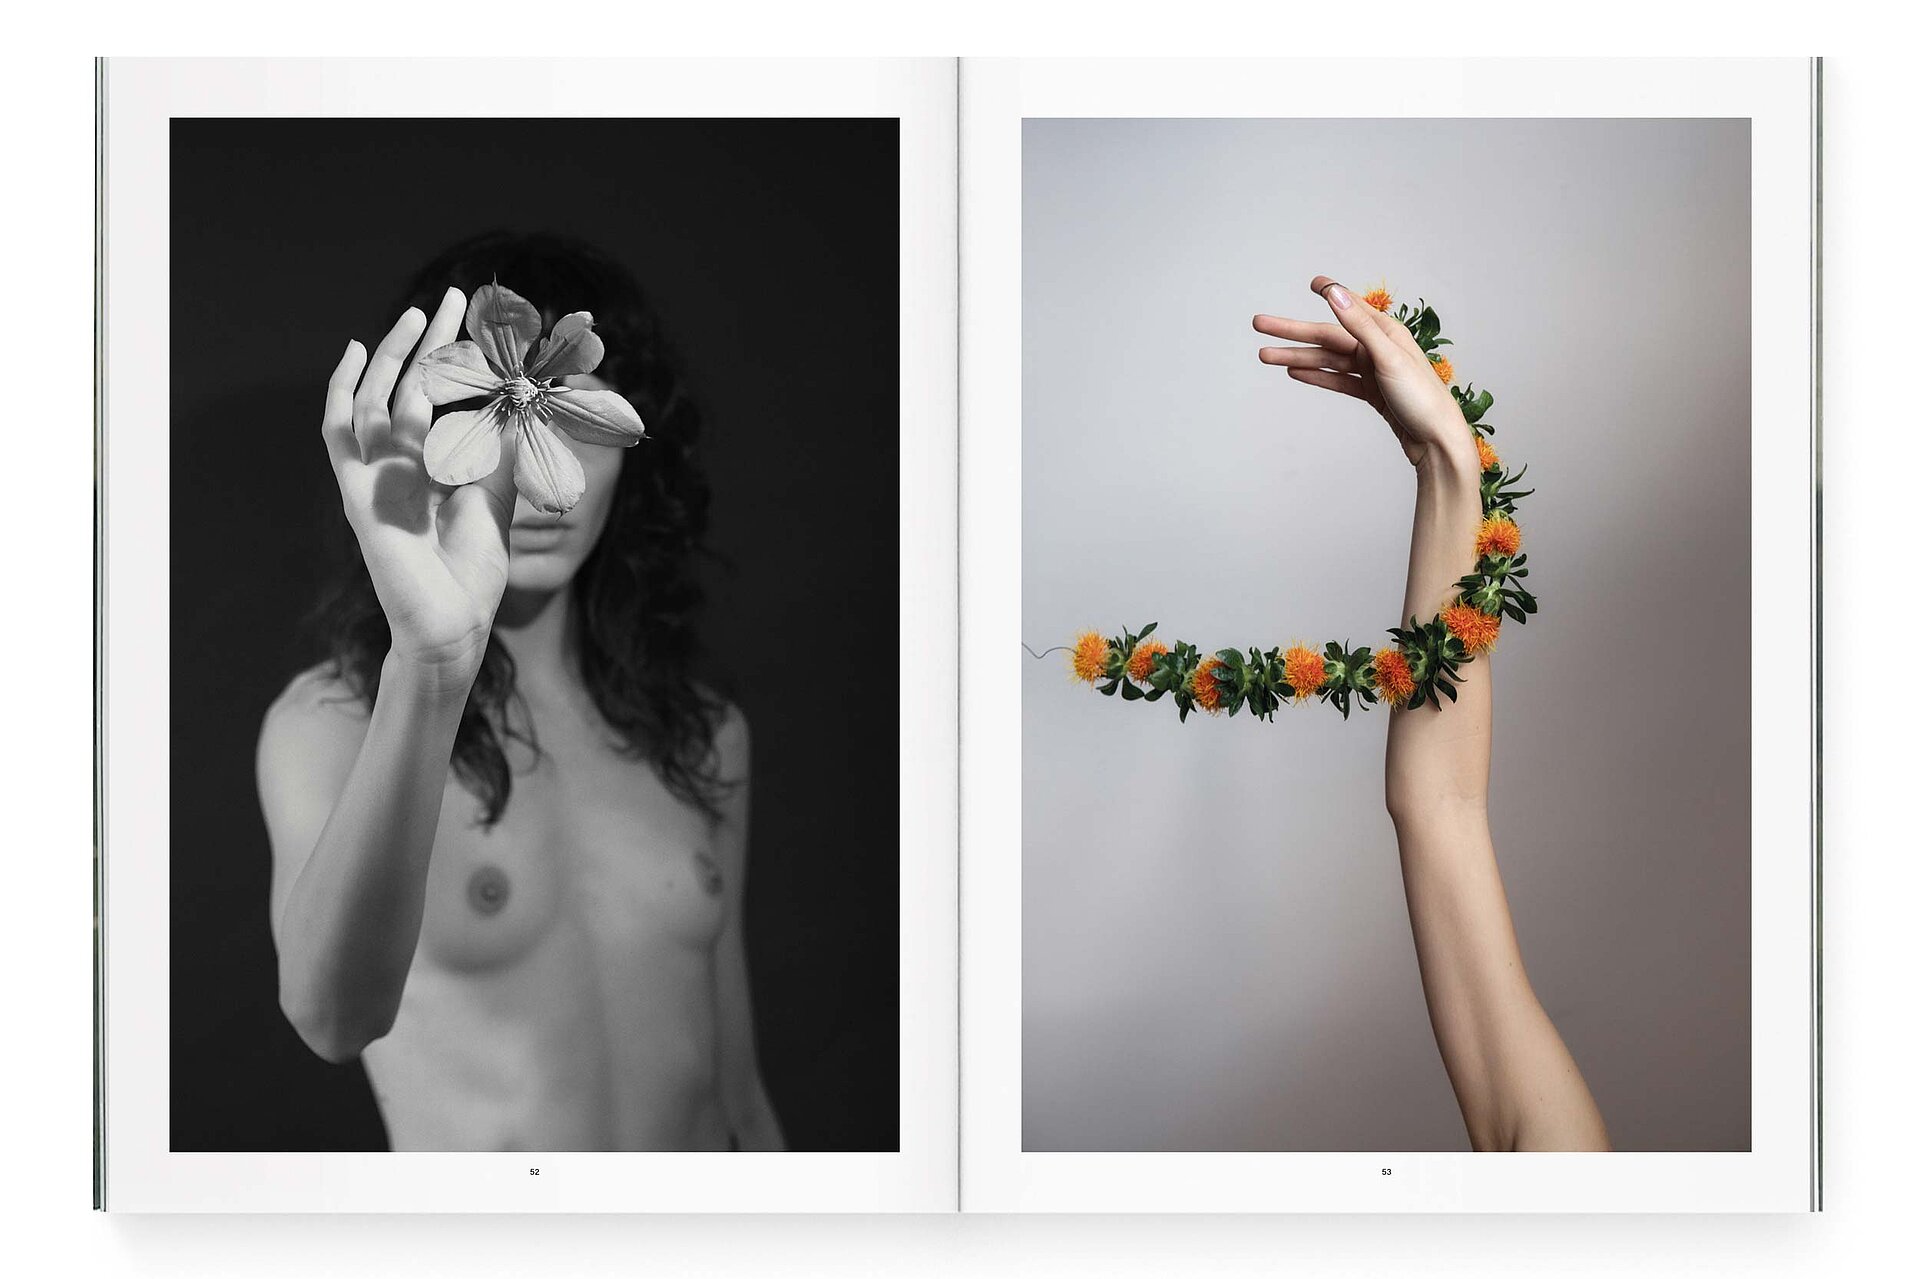 mjr magazine pages with flowers on hand design bern